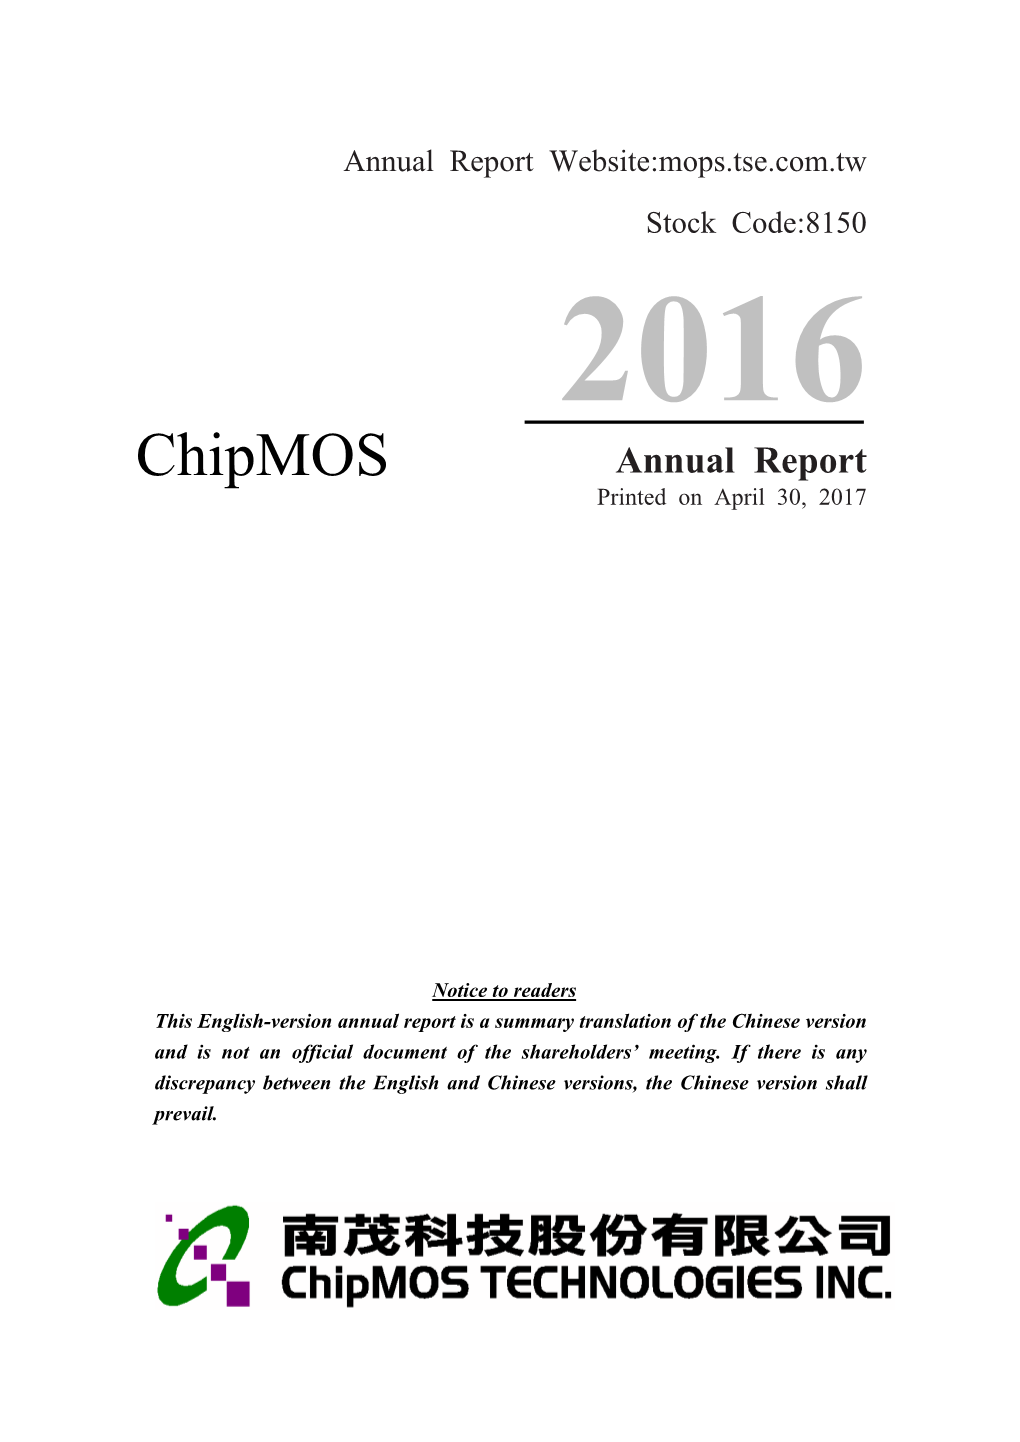 2016 Chipmos Annual Report Printed on April 30, 2017